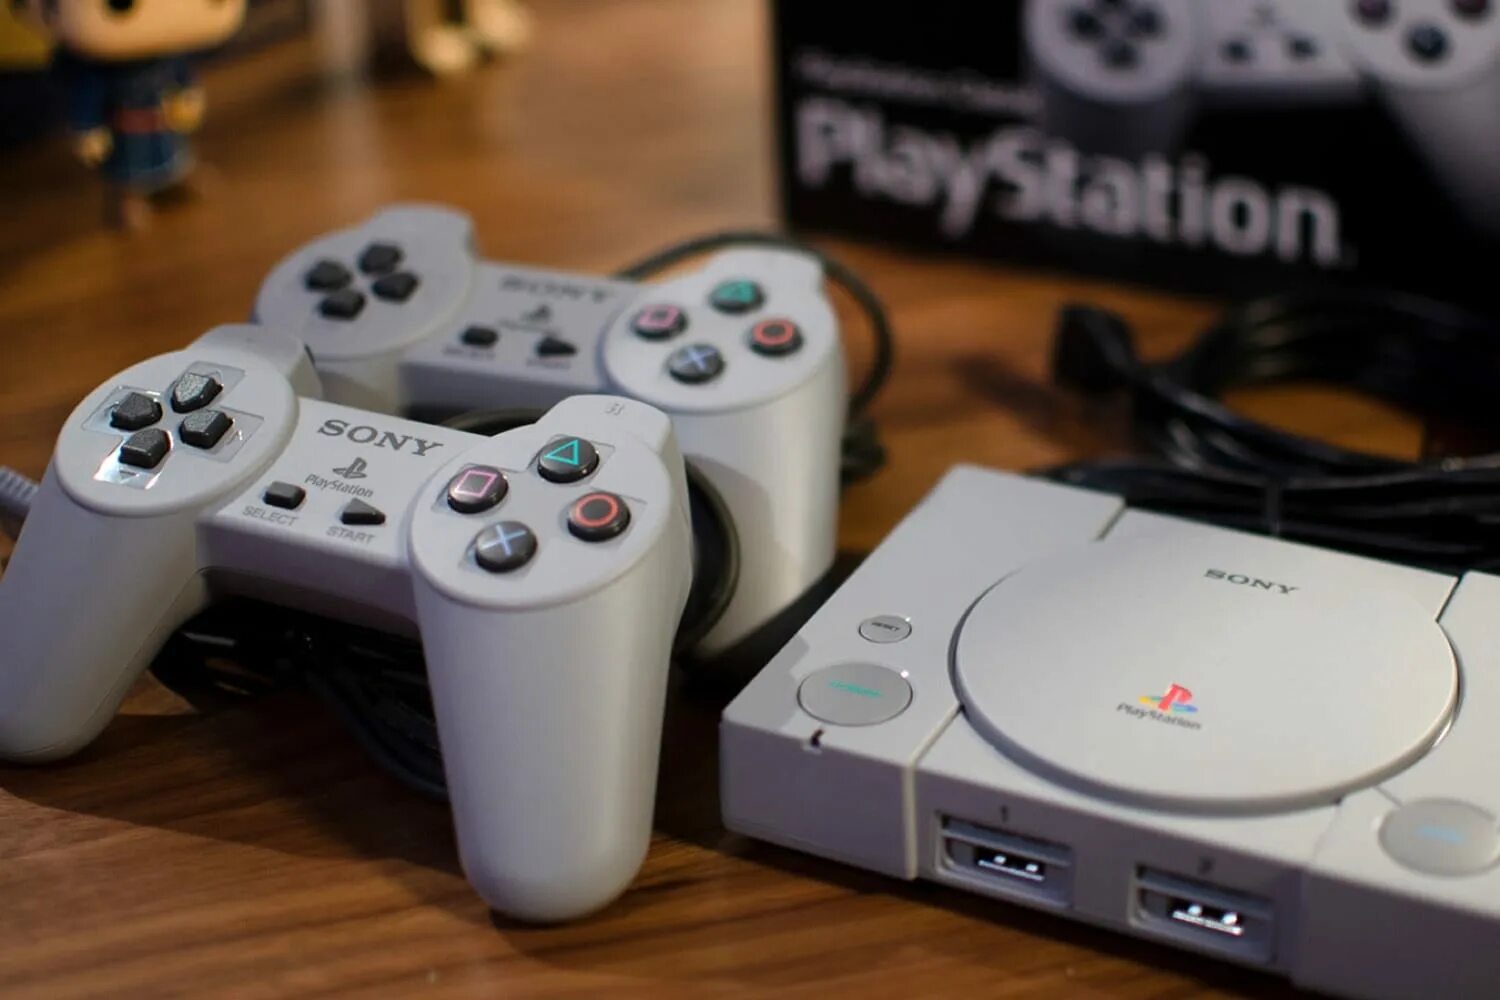 Sony PLAYSTATION 1 Classic. Sony ps1 Classic. Ps1 Classic Mini. PLAYSTATION 1 Classic Mini. Sony playstation ремонтundefined